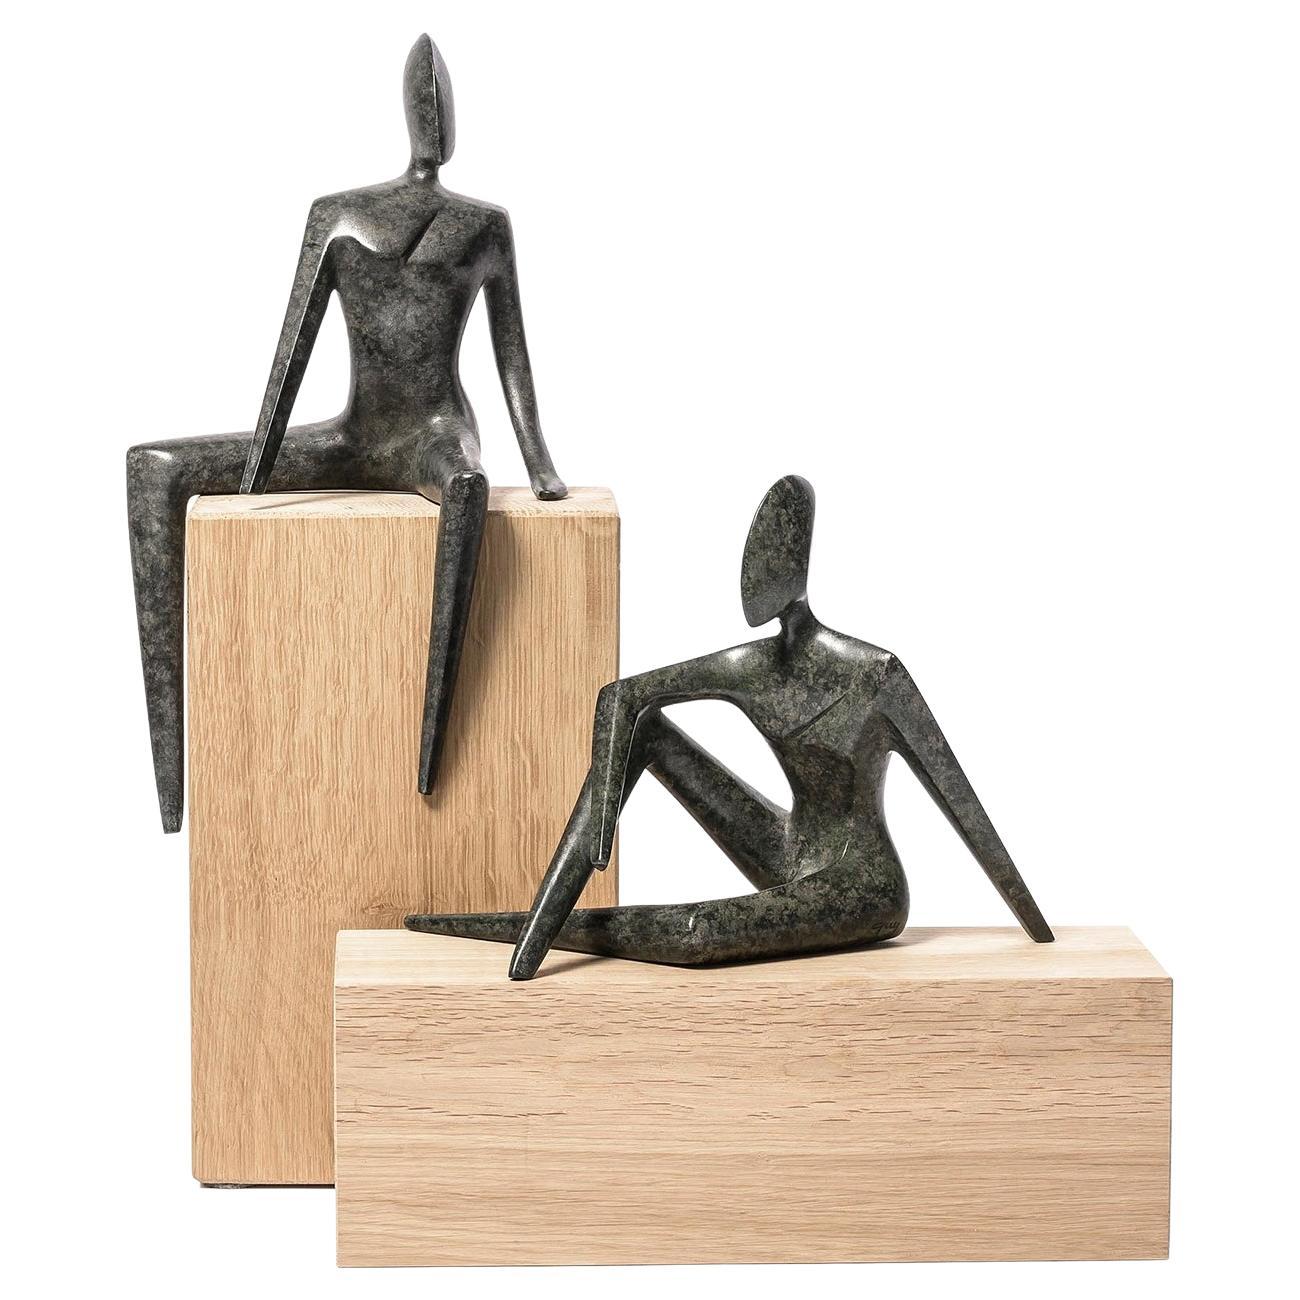 Woman and Man Set of 2 Sculpture For Sale